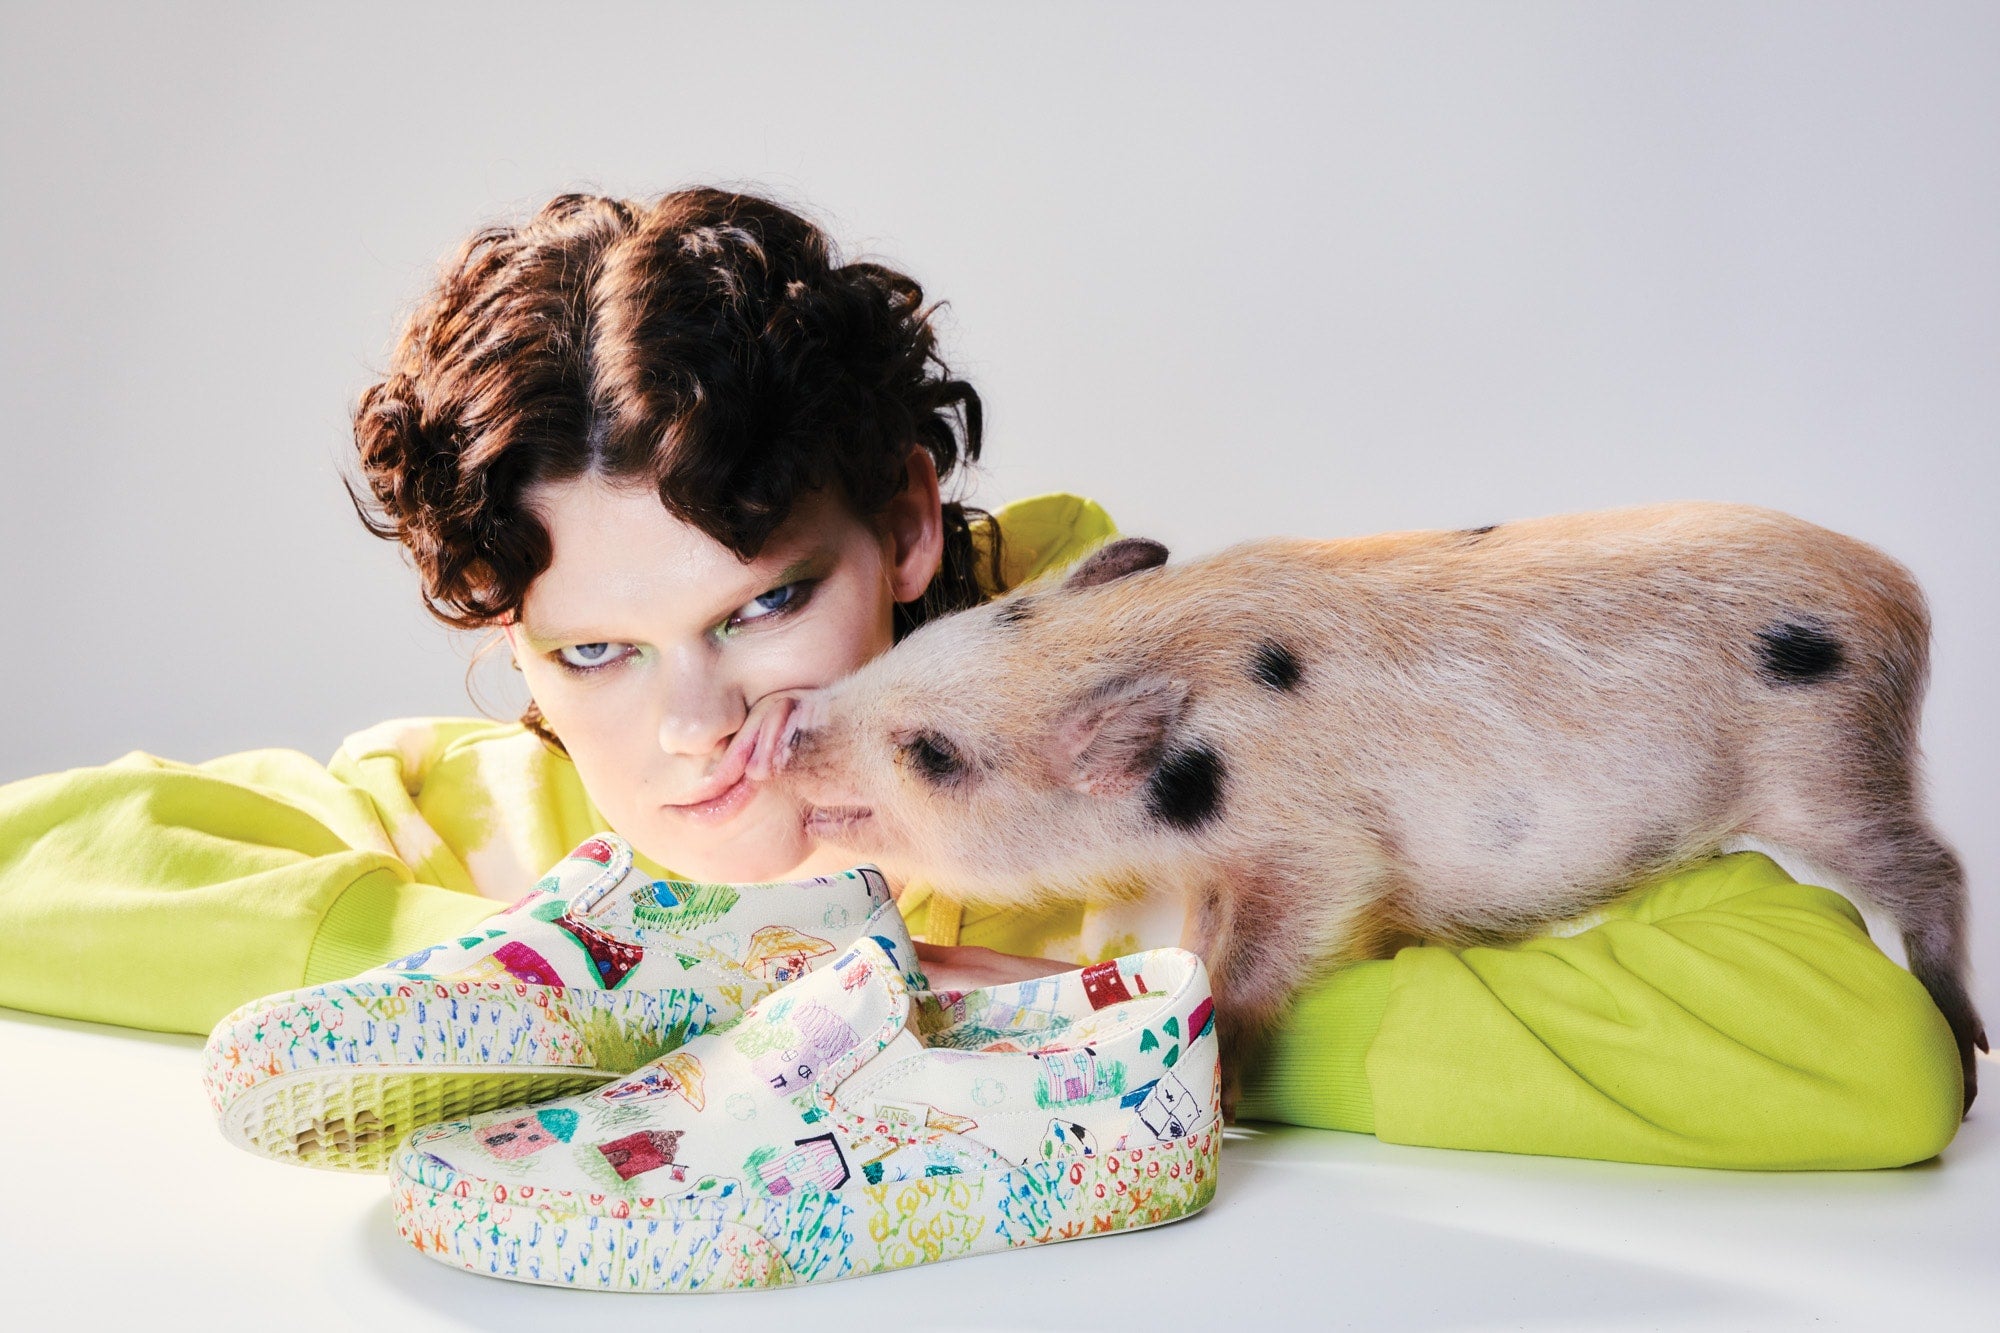 Close detail photo of a model laying next to a pig and a vans slip on shoe that is hand drawn.